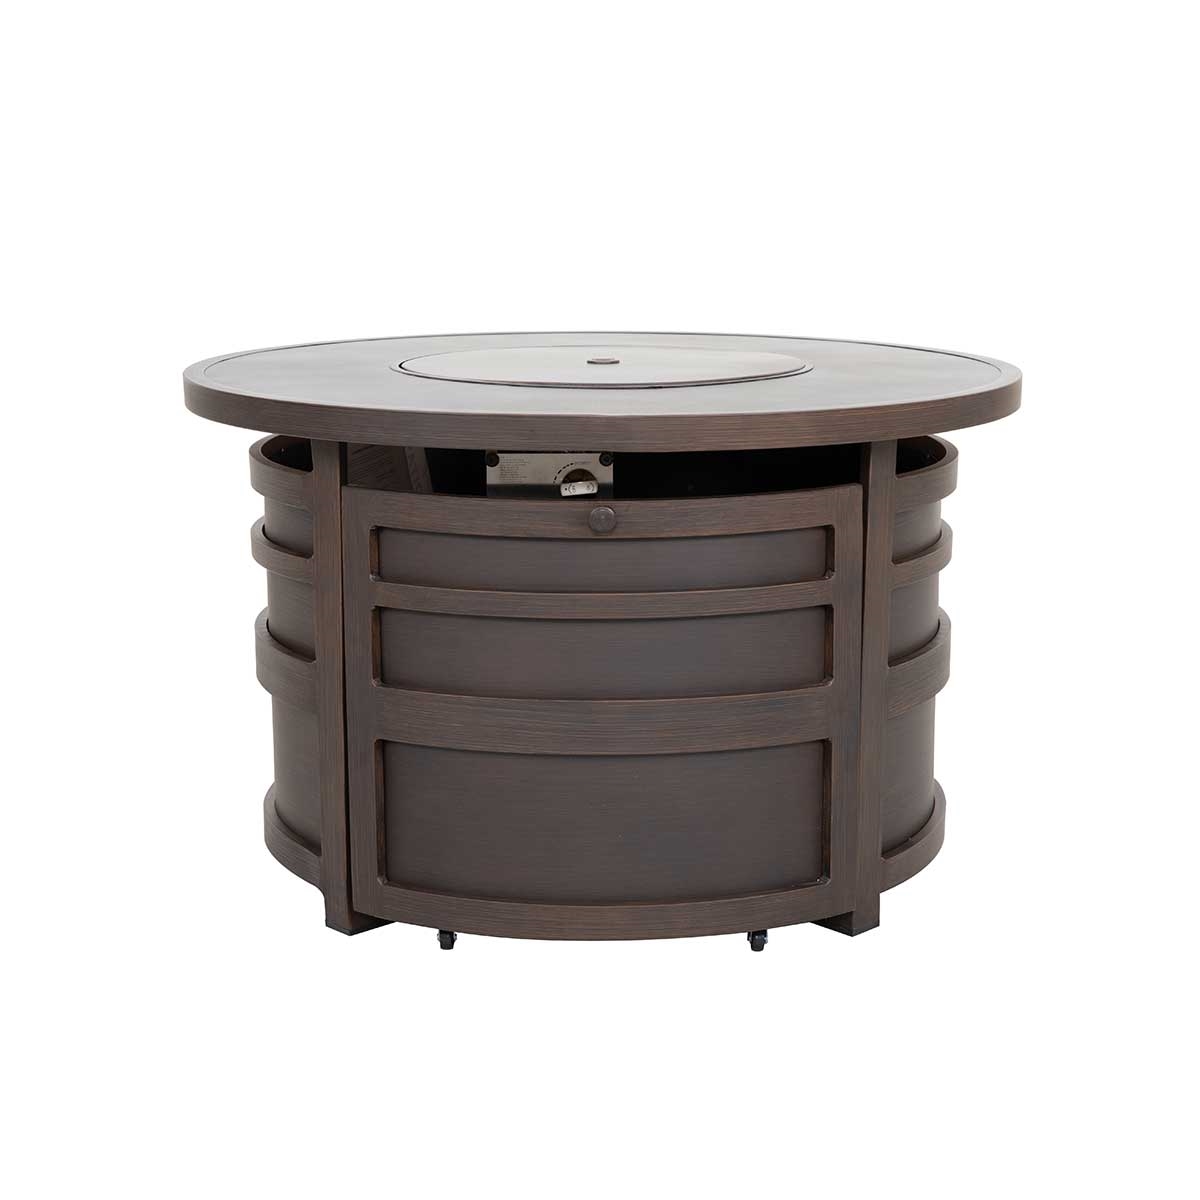 Aluminum Round Firepit Table FAA171C50-BR1_0